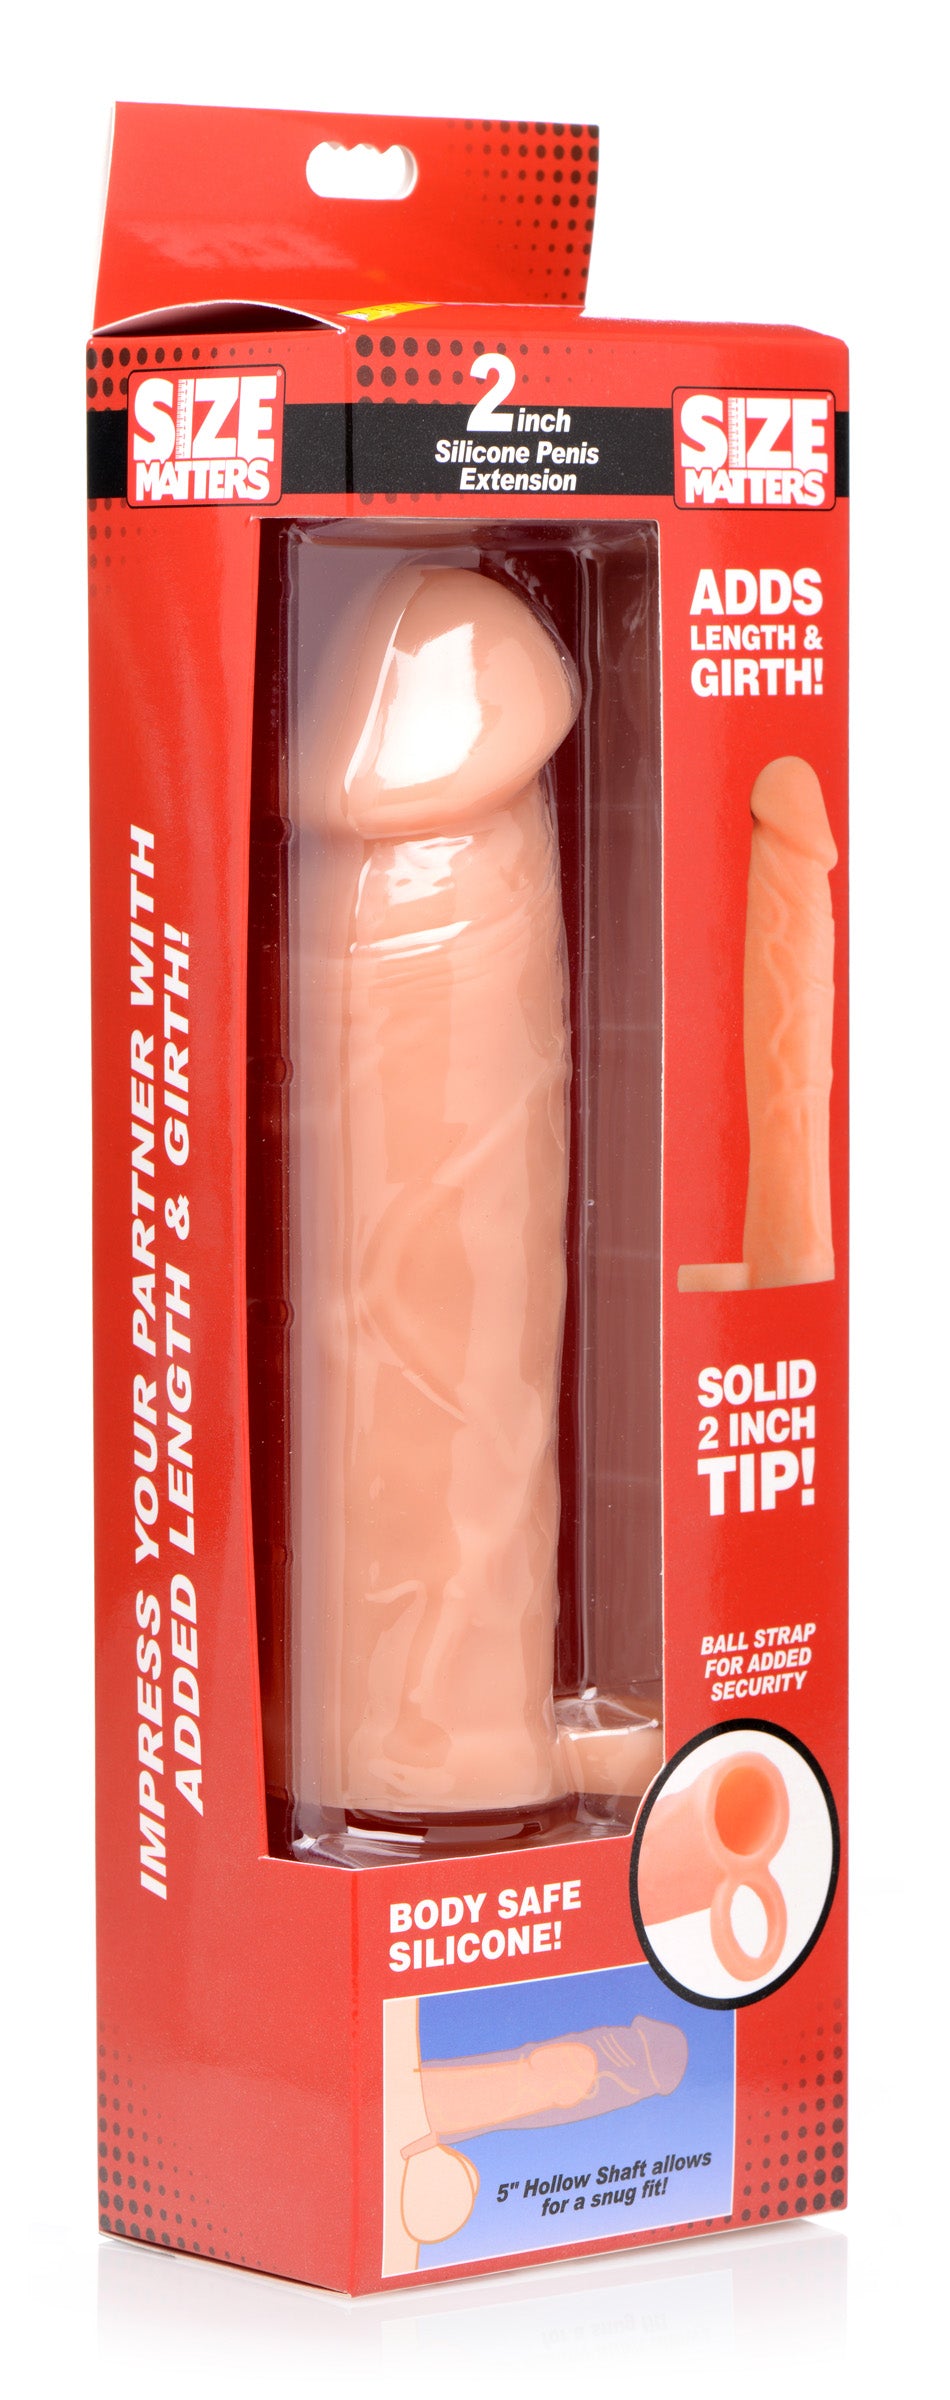 2 Inch Silicone Penis Extension - UABDSM